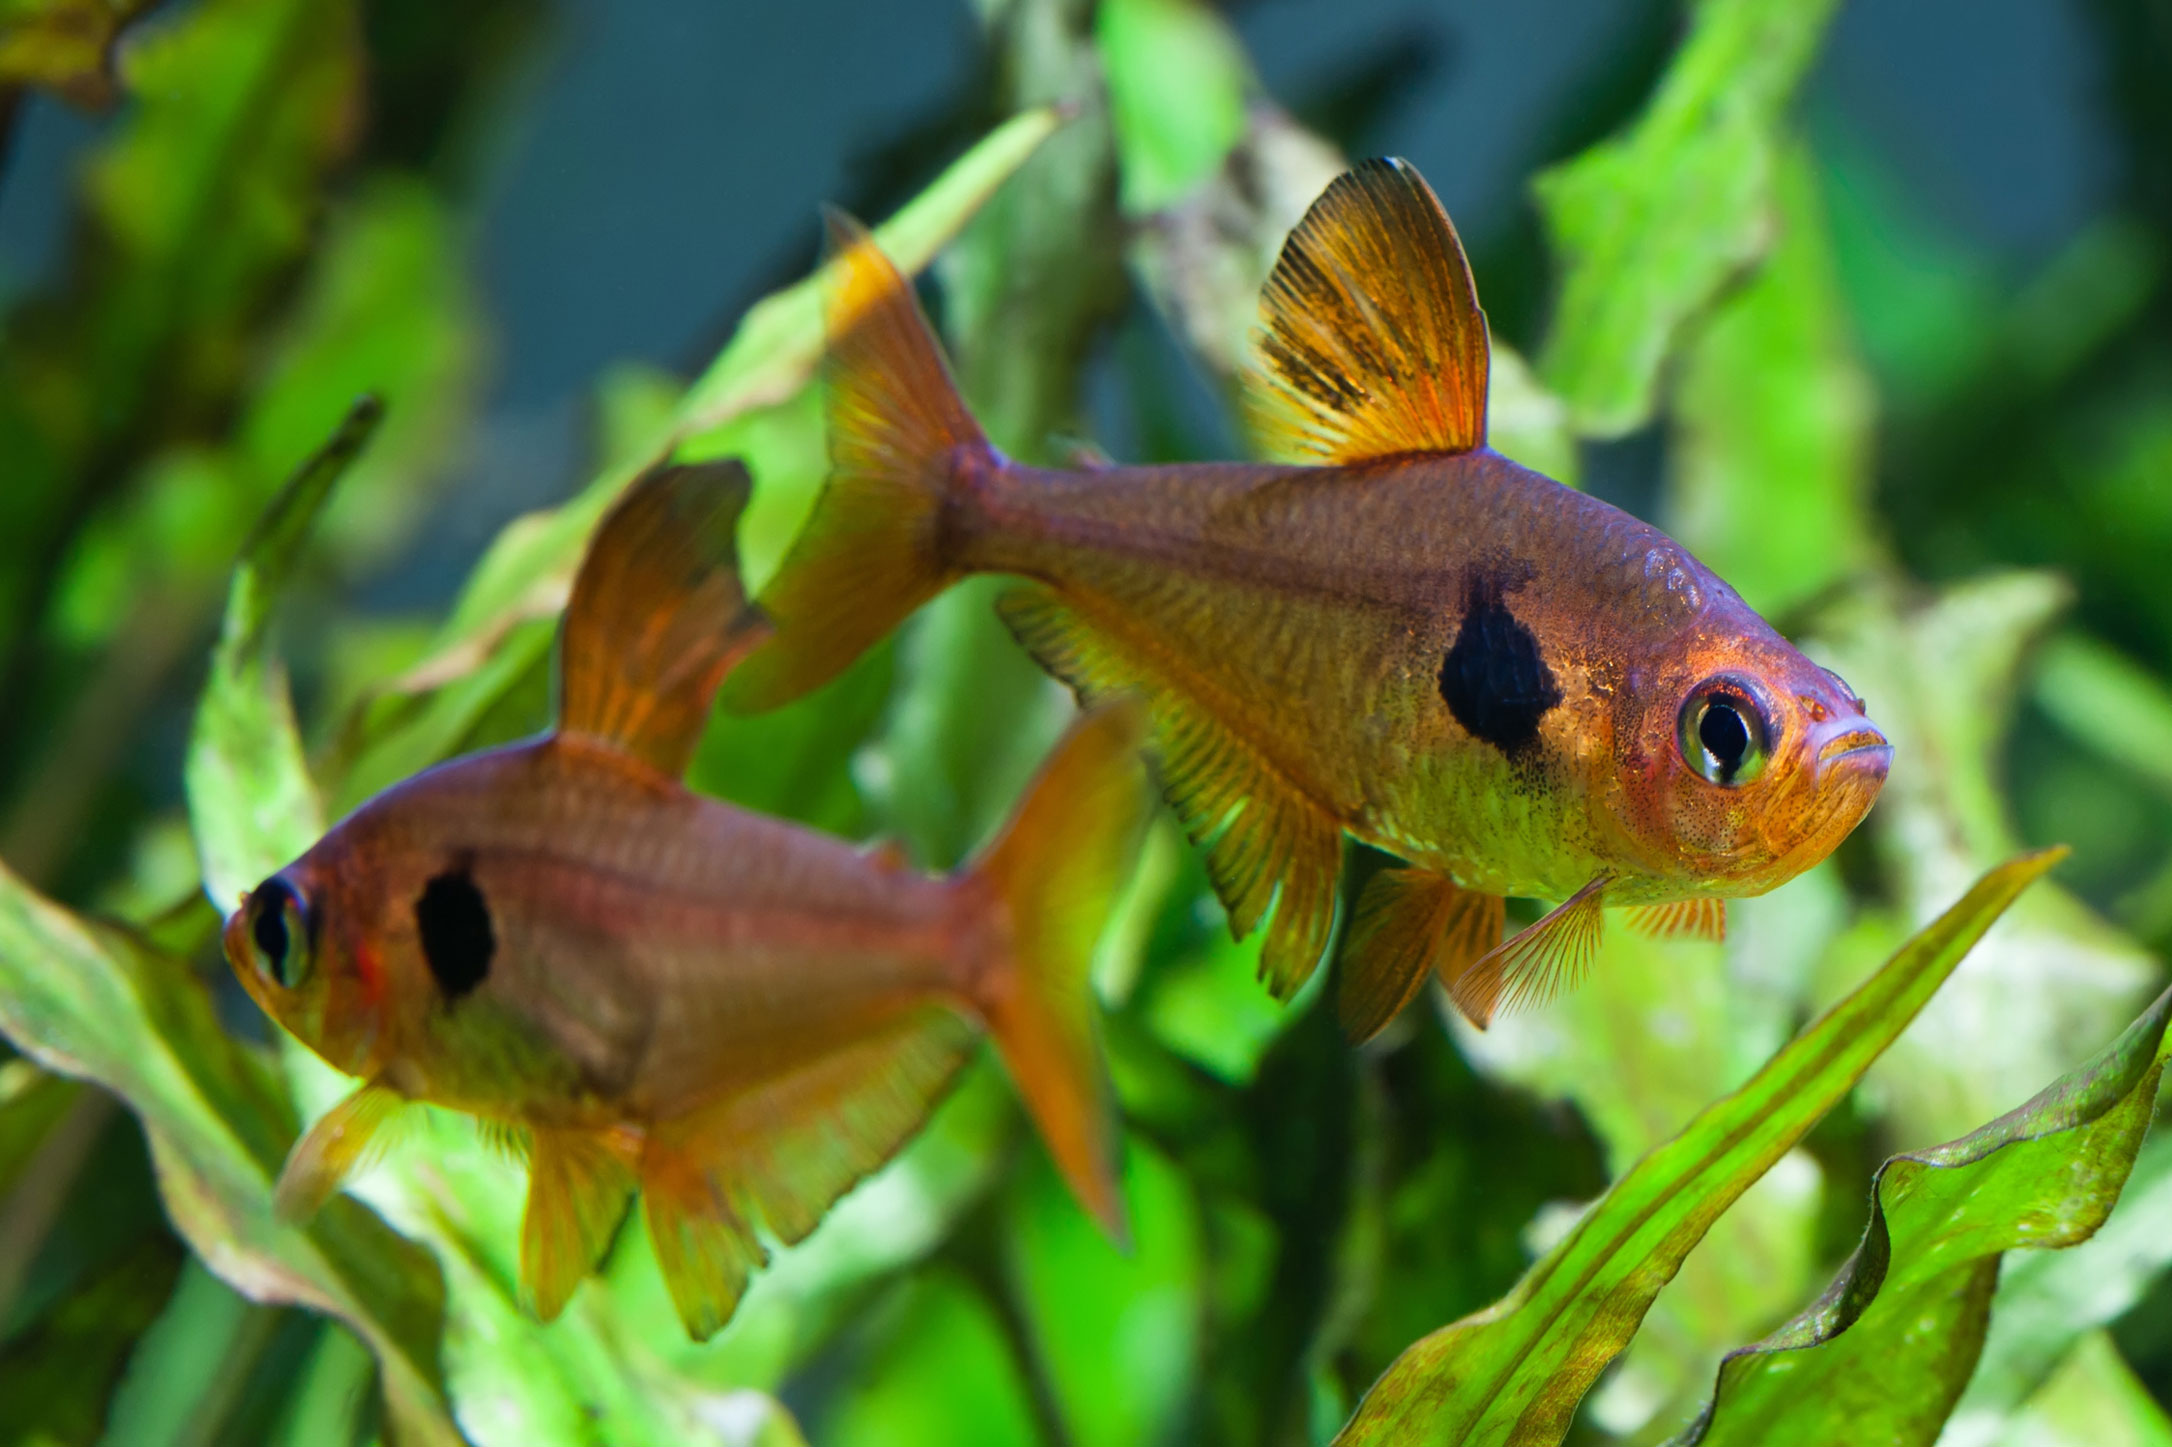 Mating rose tetras in front of Cryptocoryne